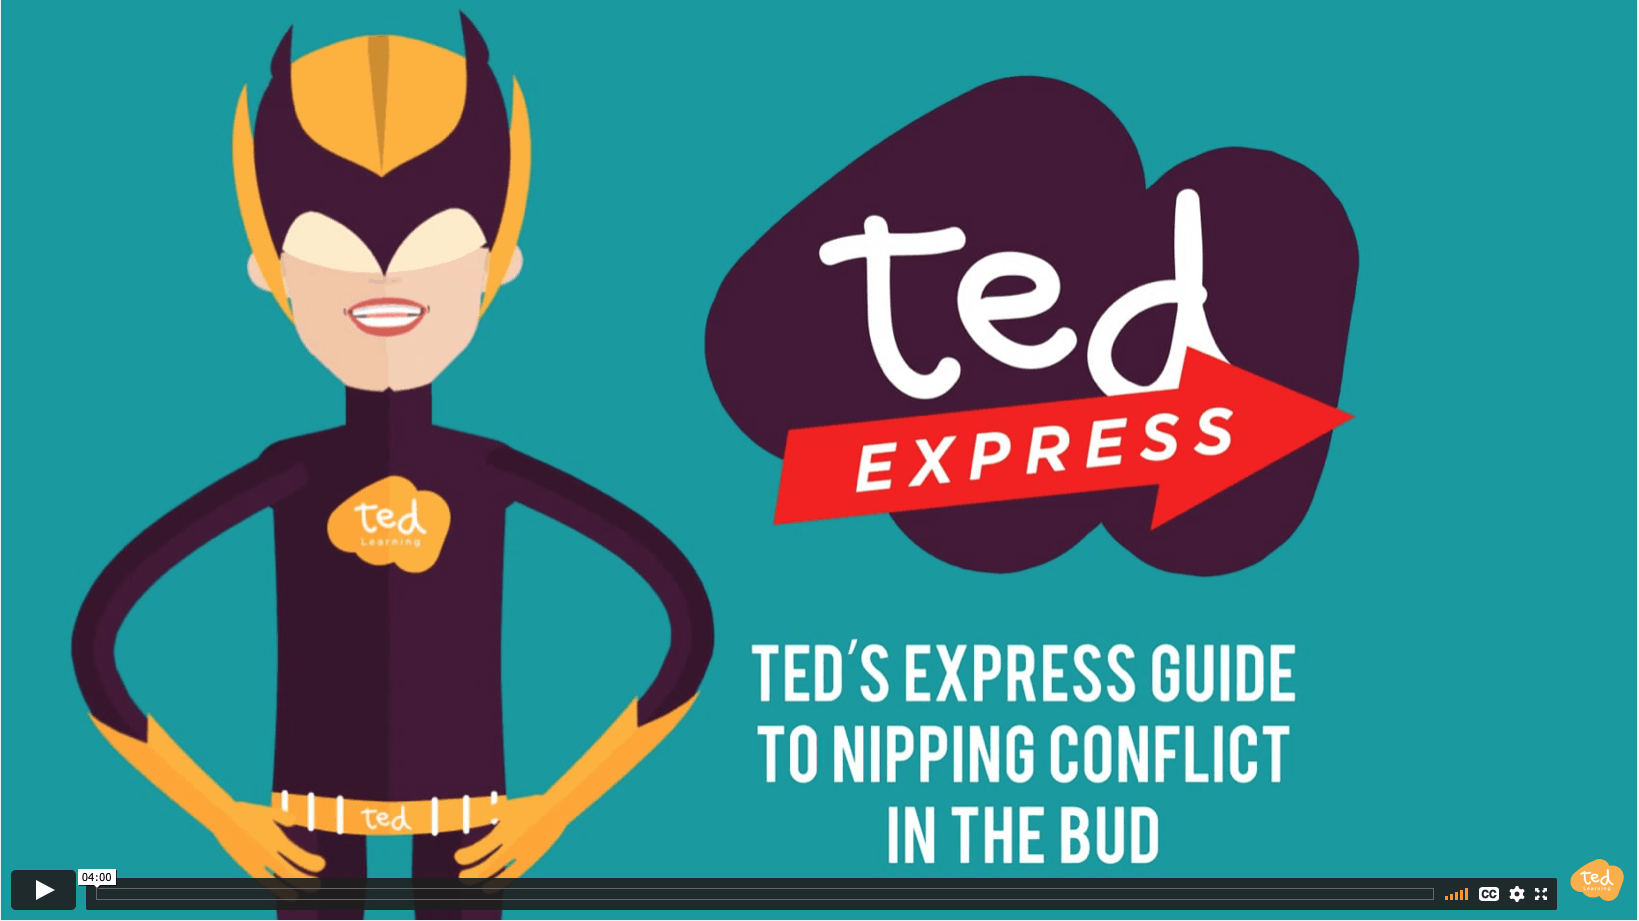 ted Express: Nipping Conflict in the Bud